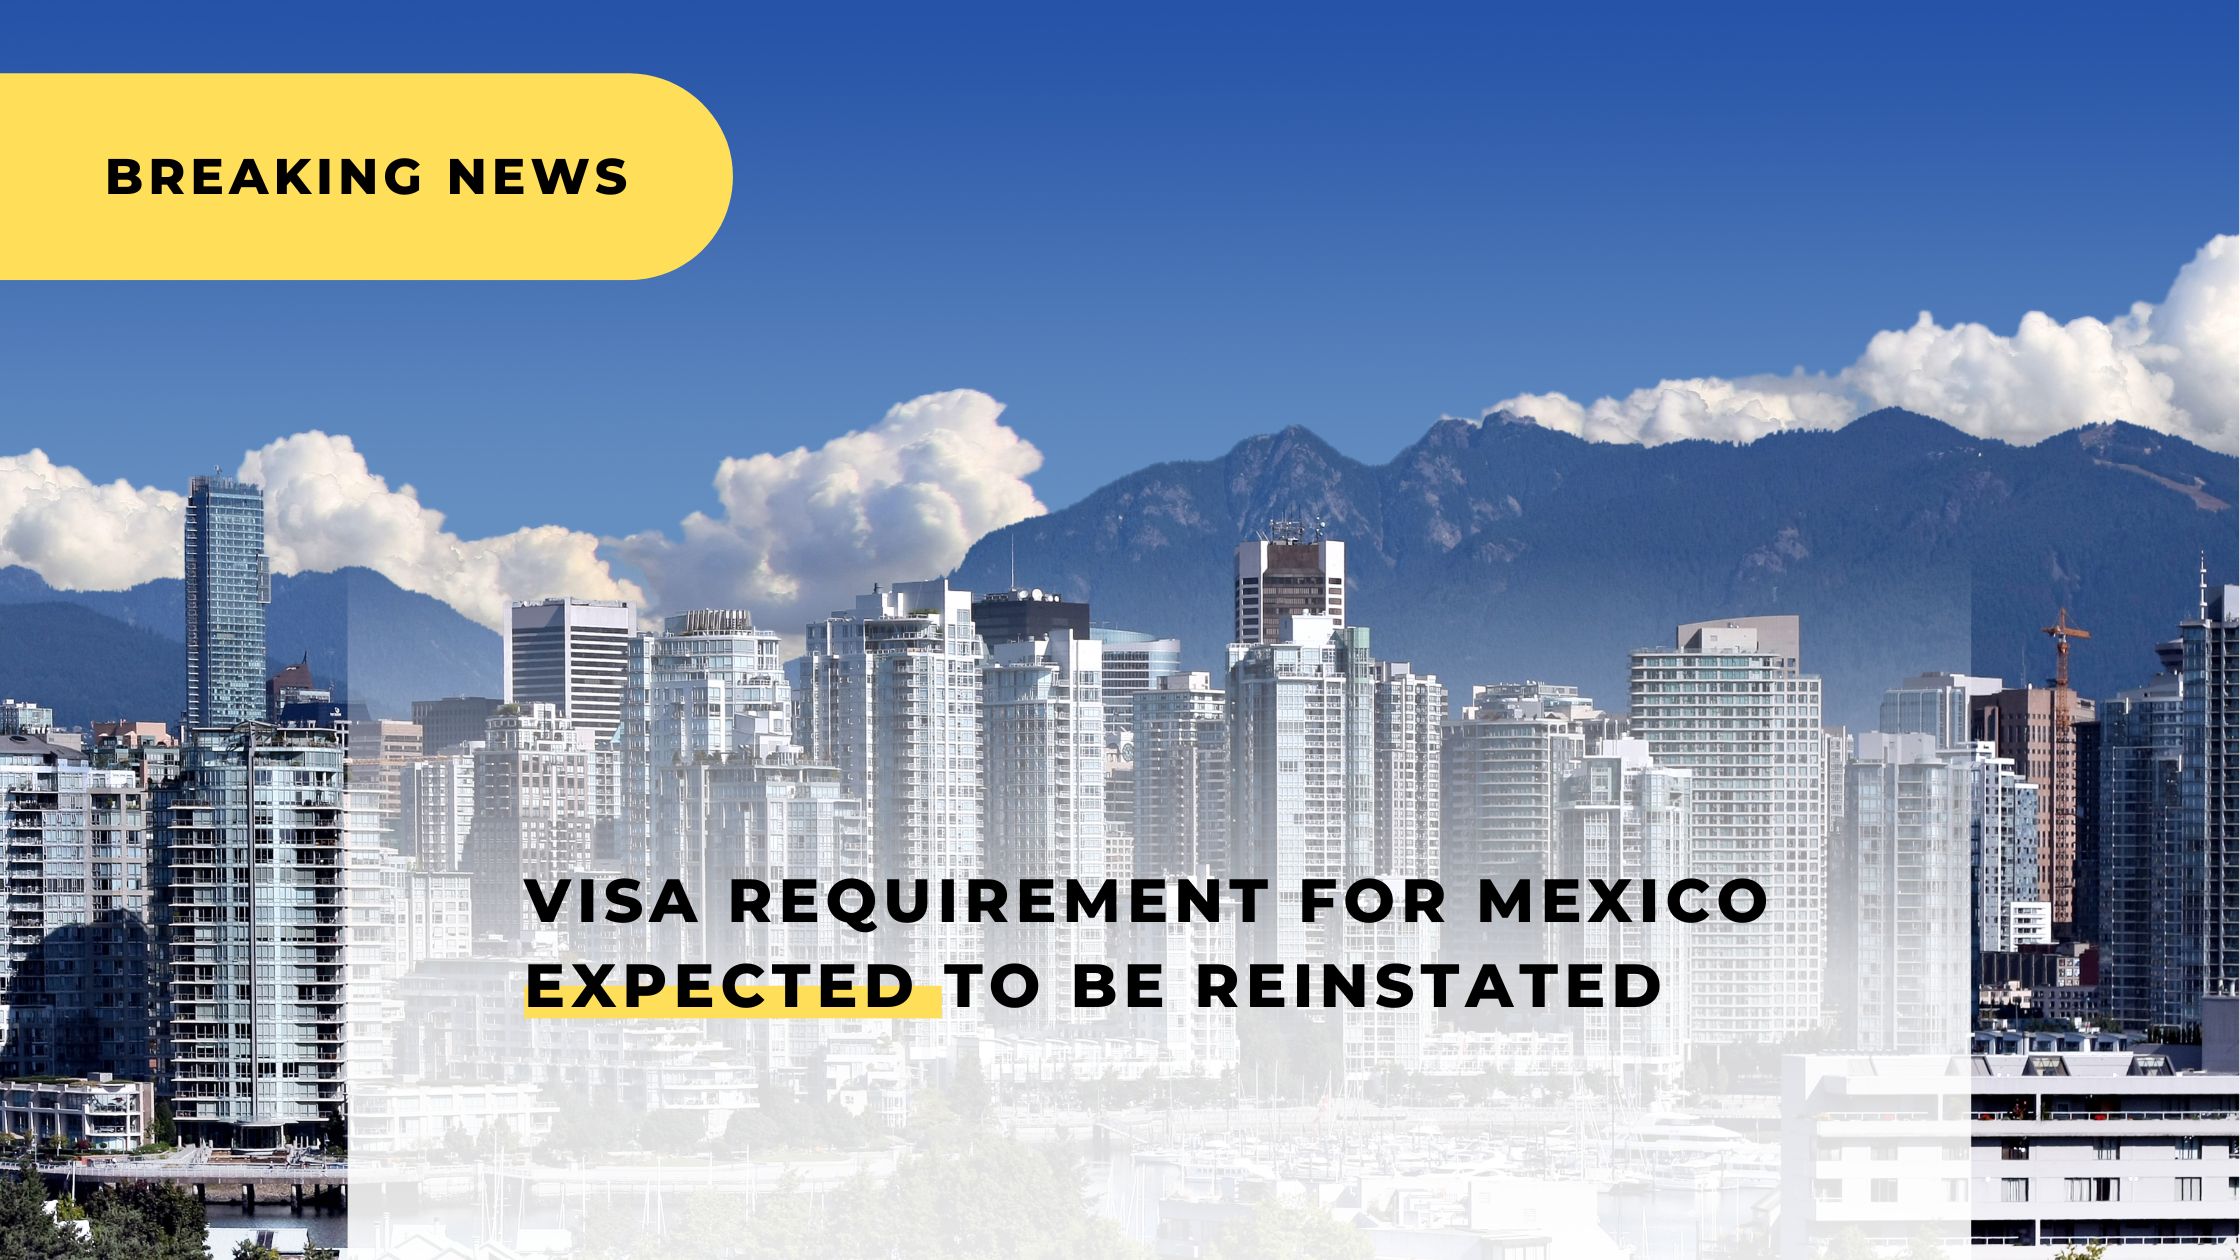 Recommends Prospective Mexican Students Apply for eTA Now